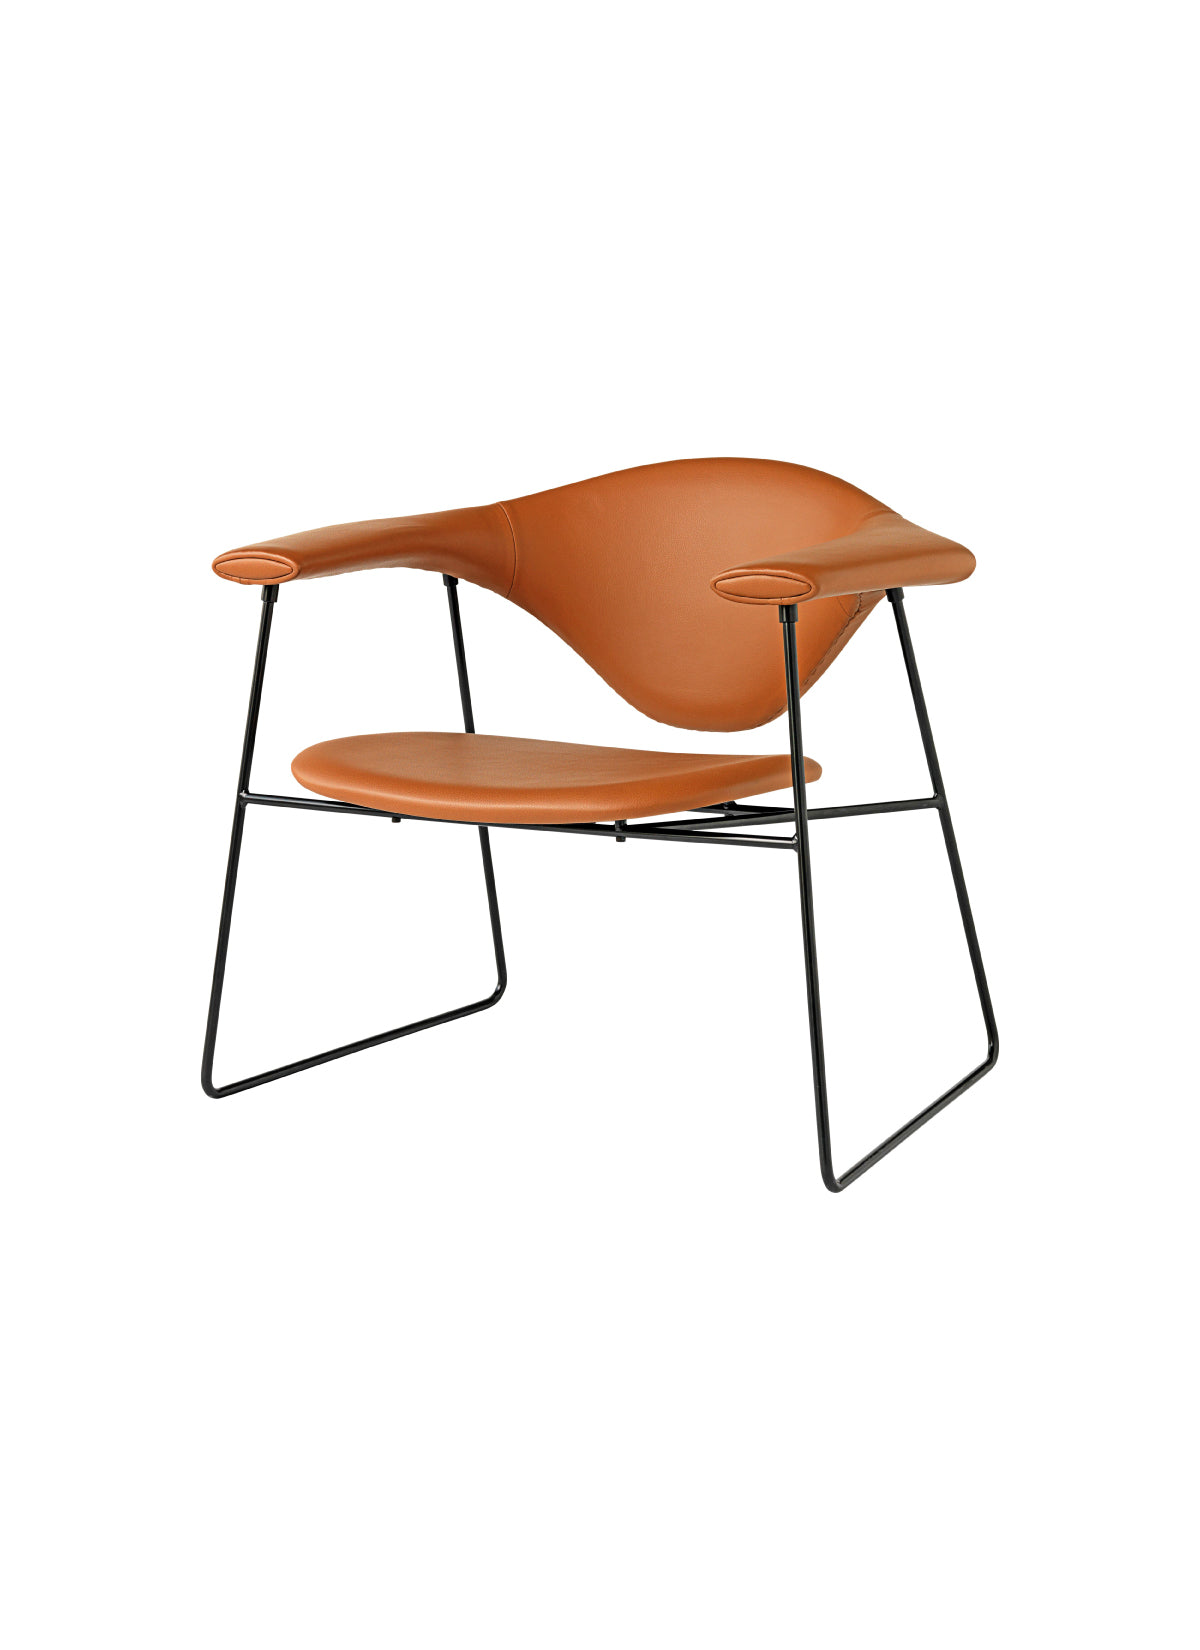 Masculo Lounge Chair - Sledge Base by Gubi